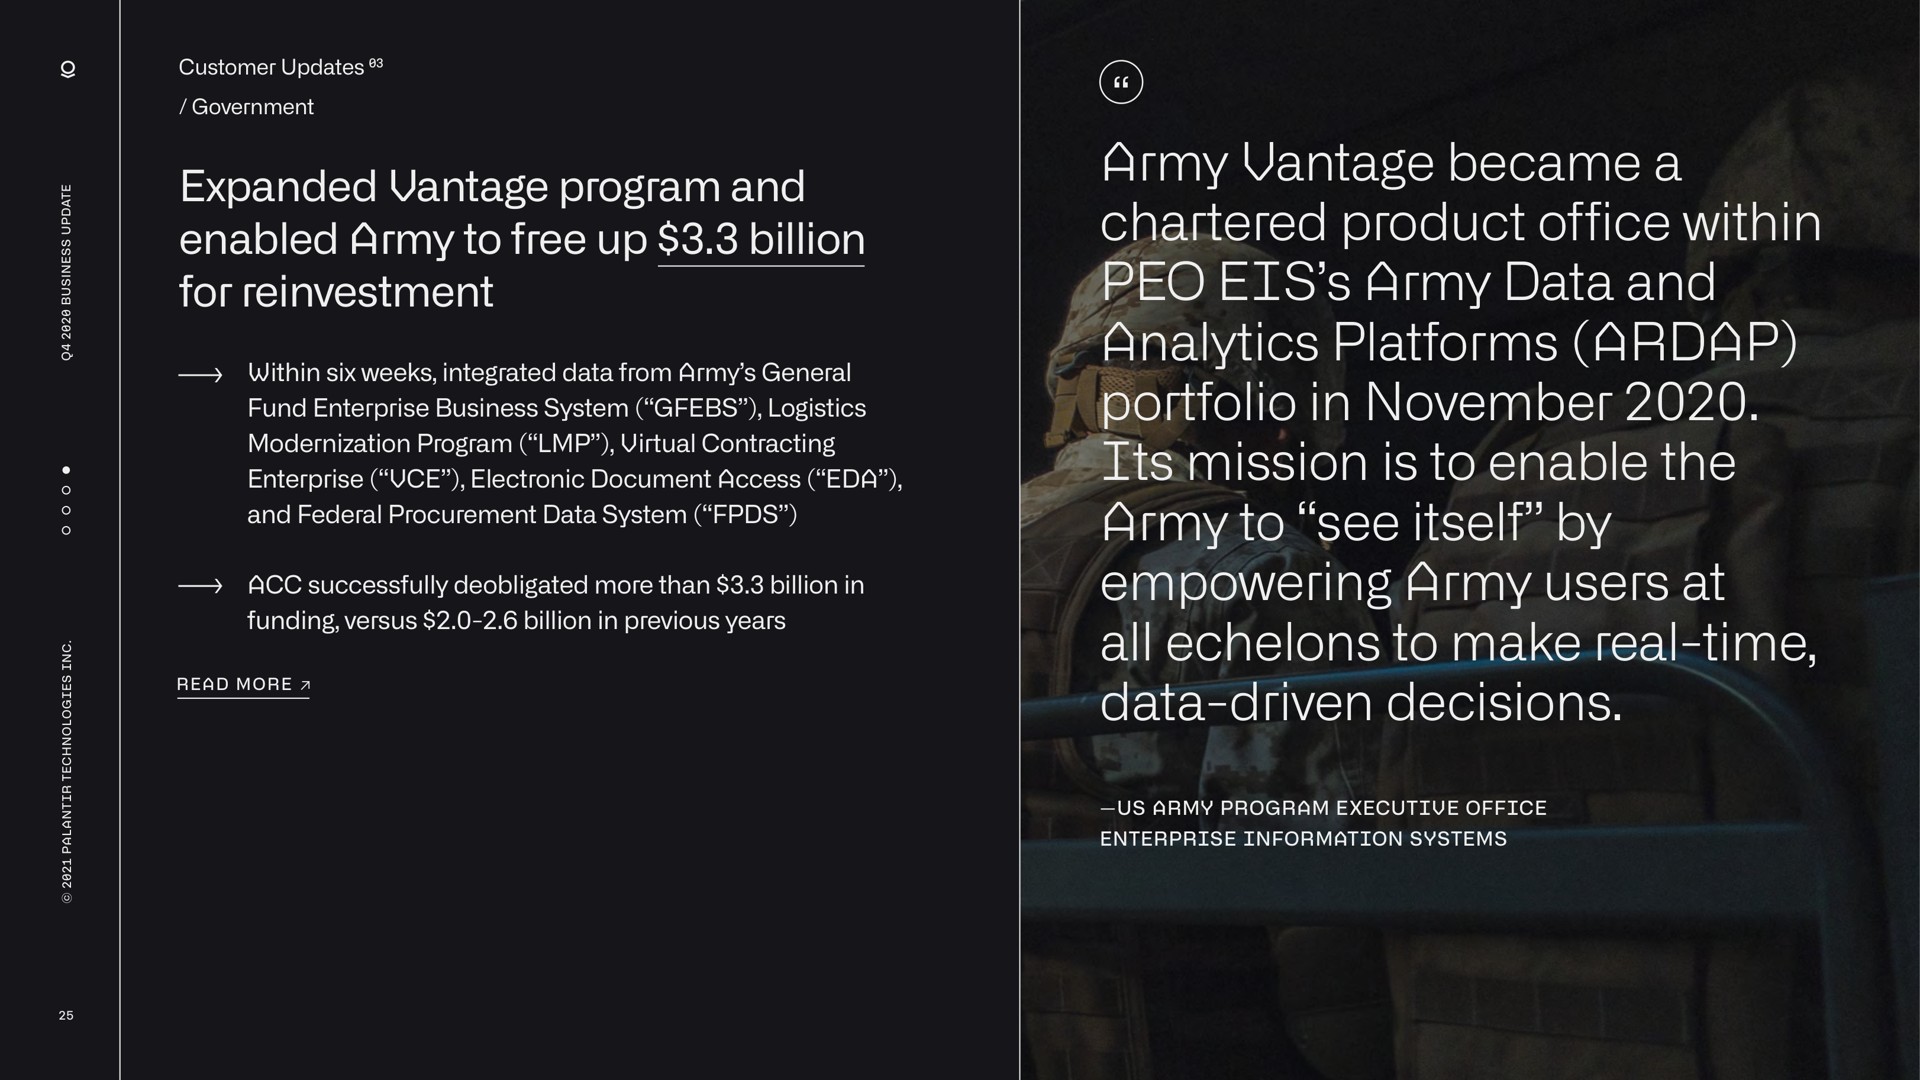 expanded vantage program and enabled army to free up billion for reinvestment army vantage became a chartered product office within army data and analytics platforms portfolio in its mission is to enable the army to see itself by empowering army users at all echelons to make real time data driven decisions els tis mission | Palantir